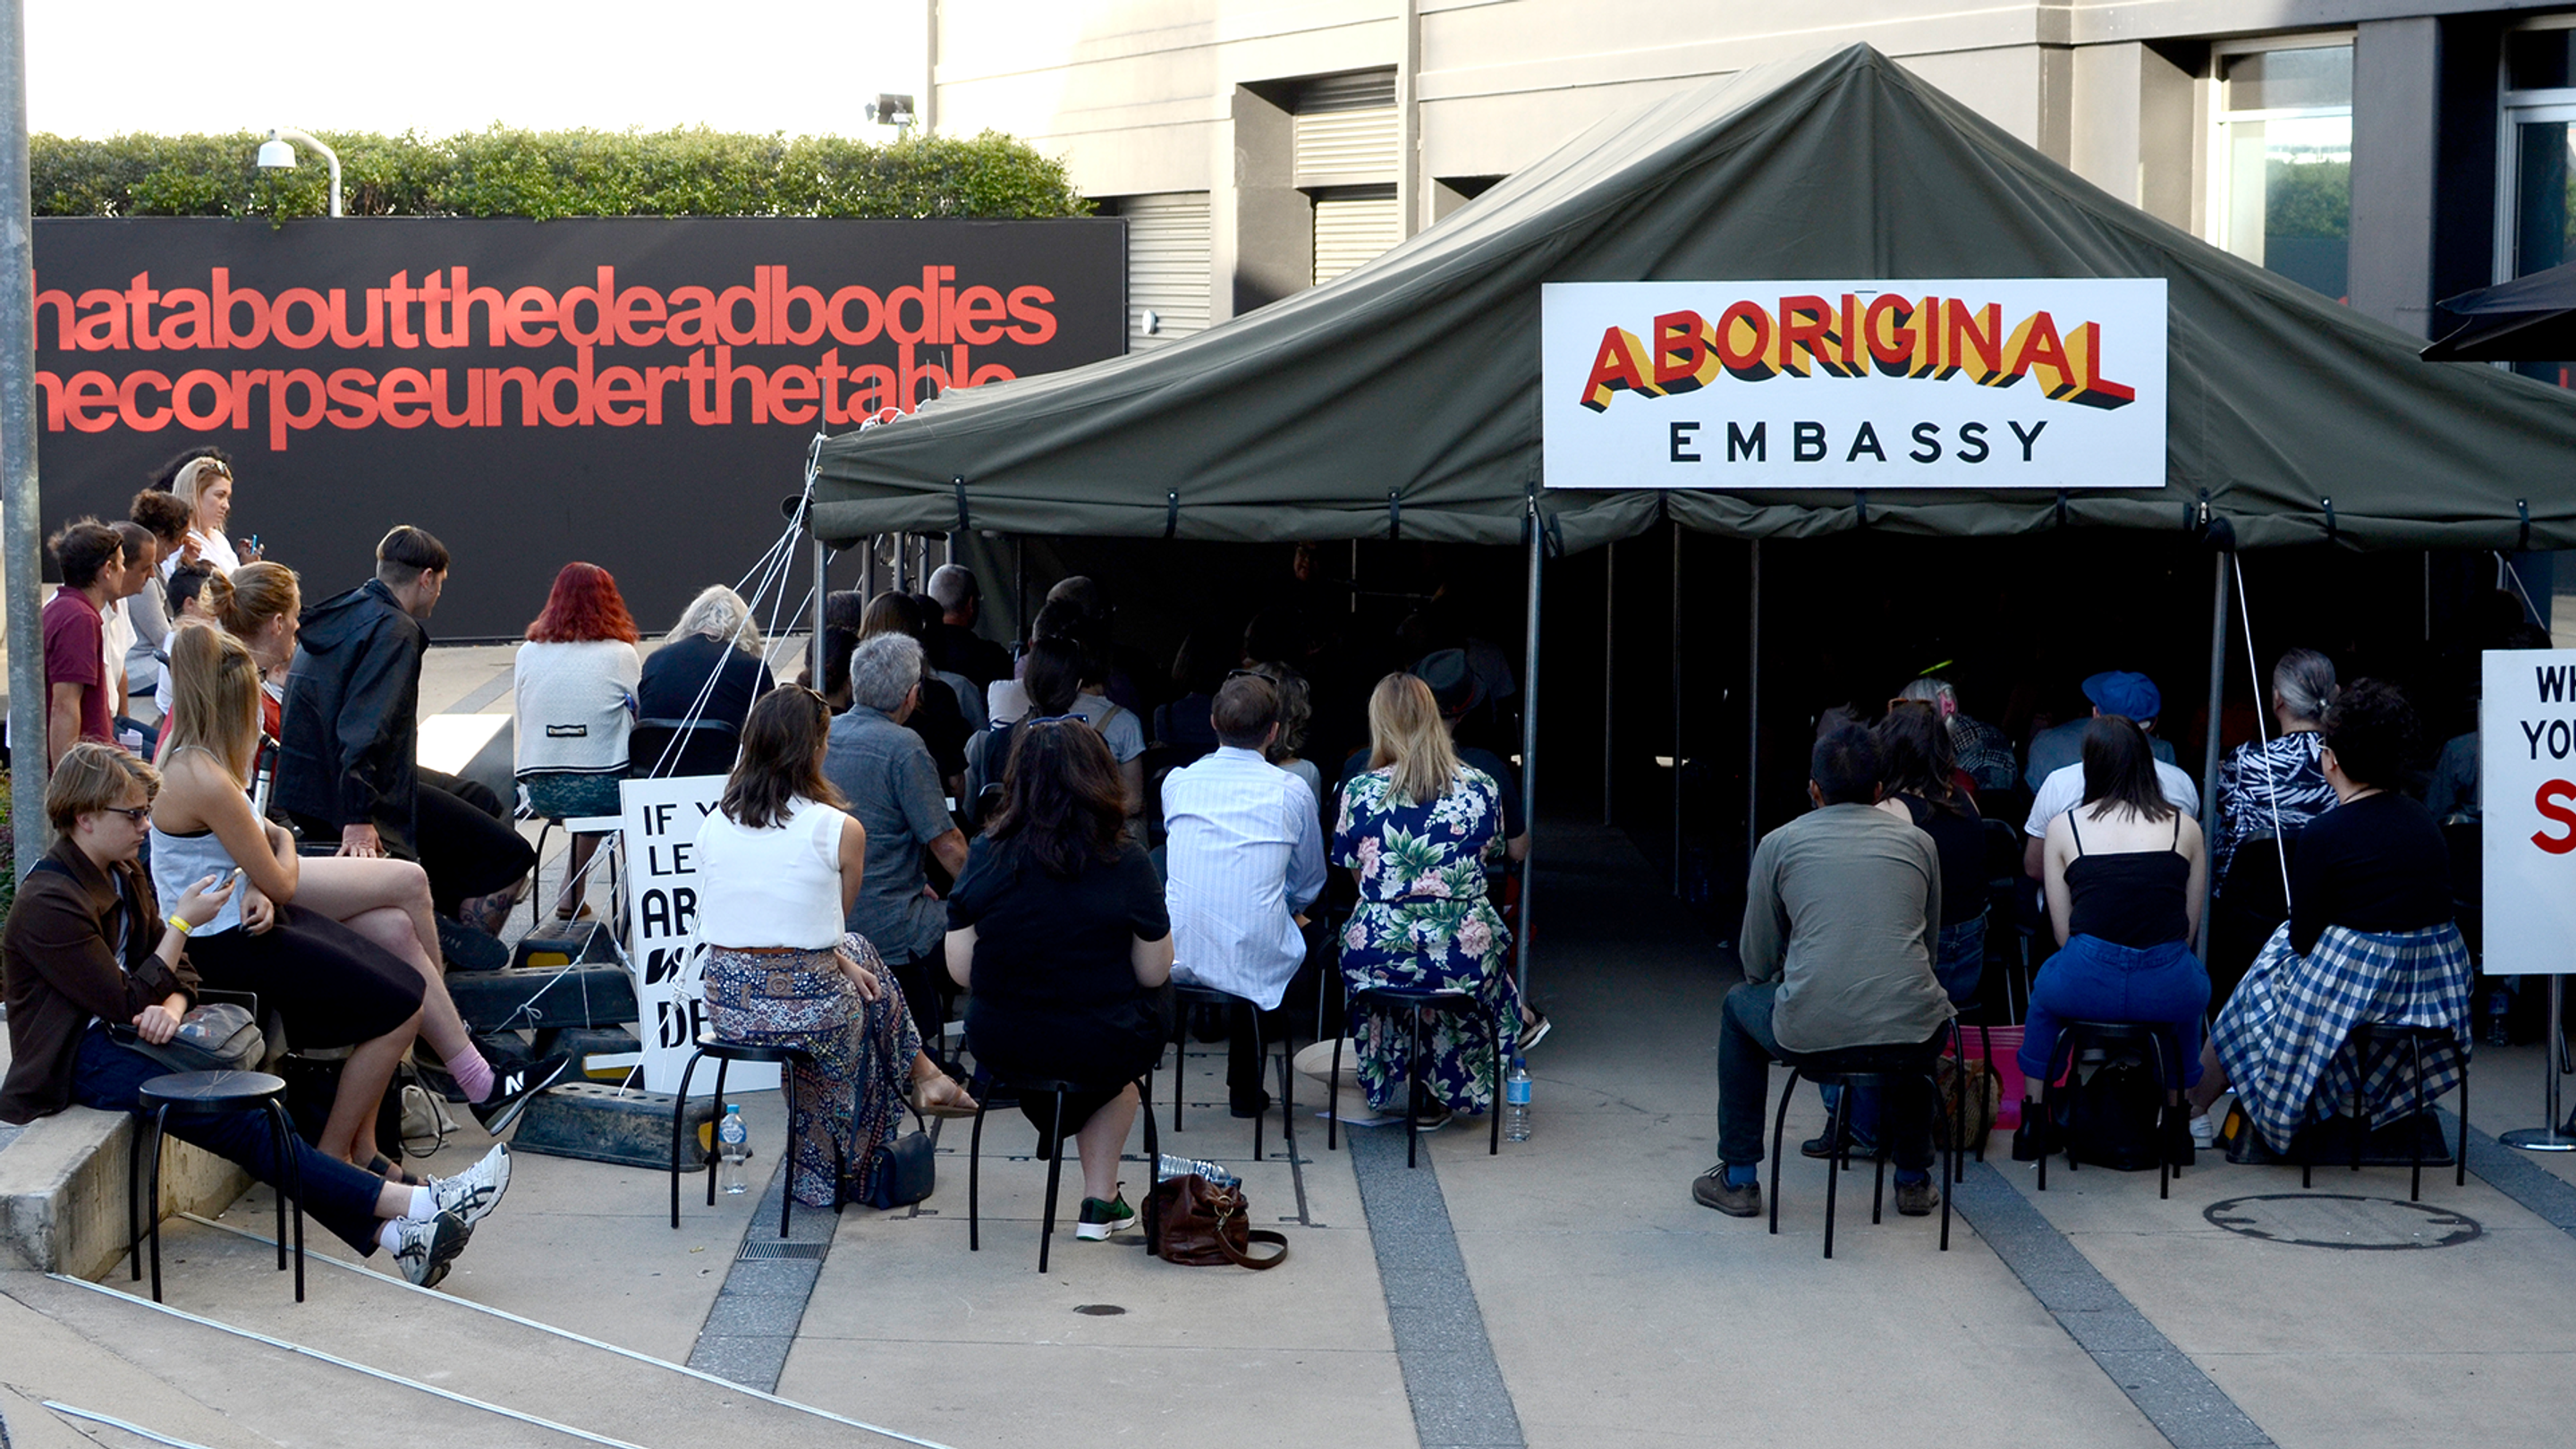 A large canvas tent with the sign 'Aboriginal Embassy'. People seated on stools gather around its entrance listening to a speaker 